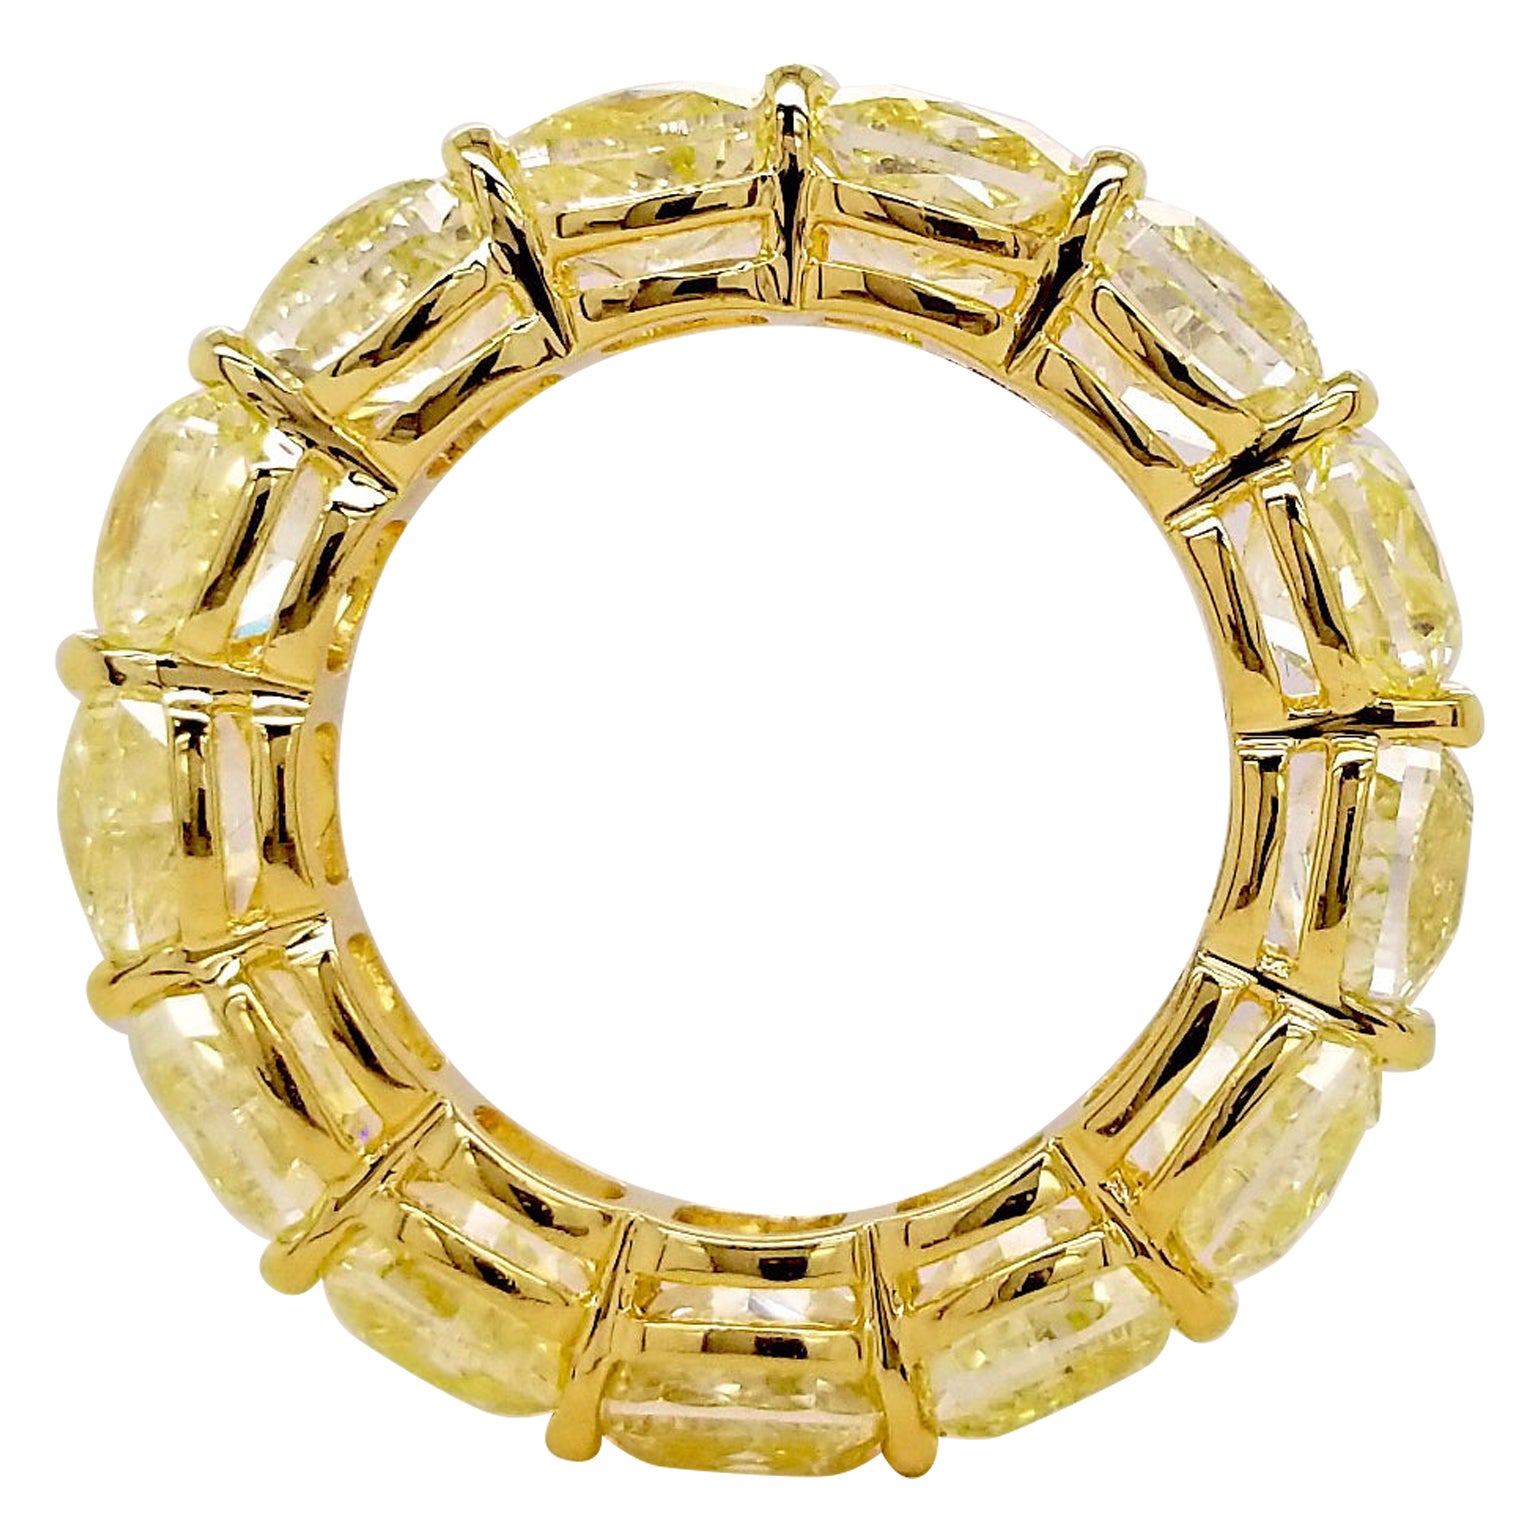 Scarselli GIA-Certified Fancy Light Yellow Diamond Eternity Band 18k Yellow Gold For Sale